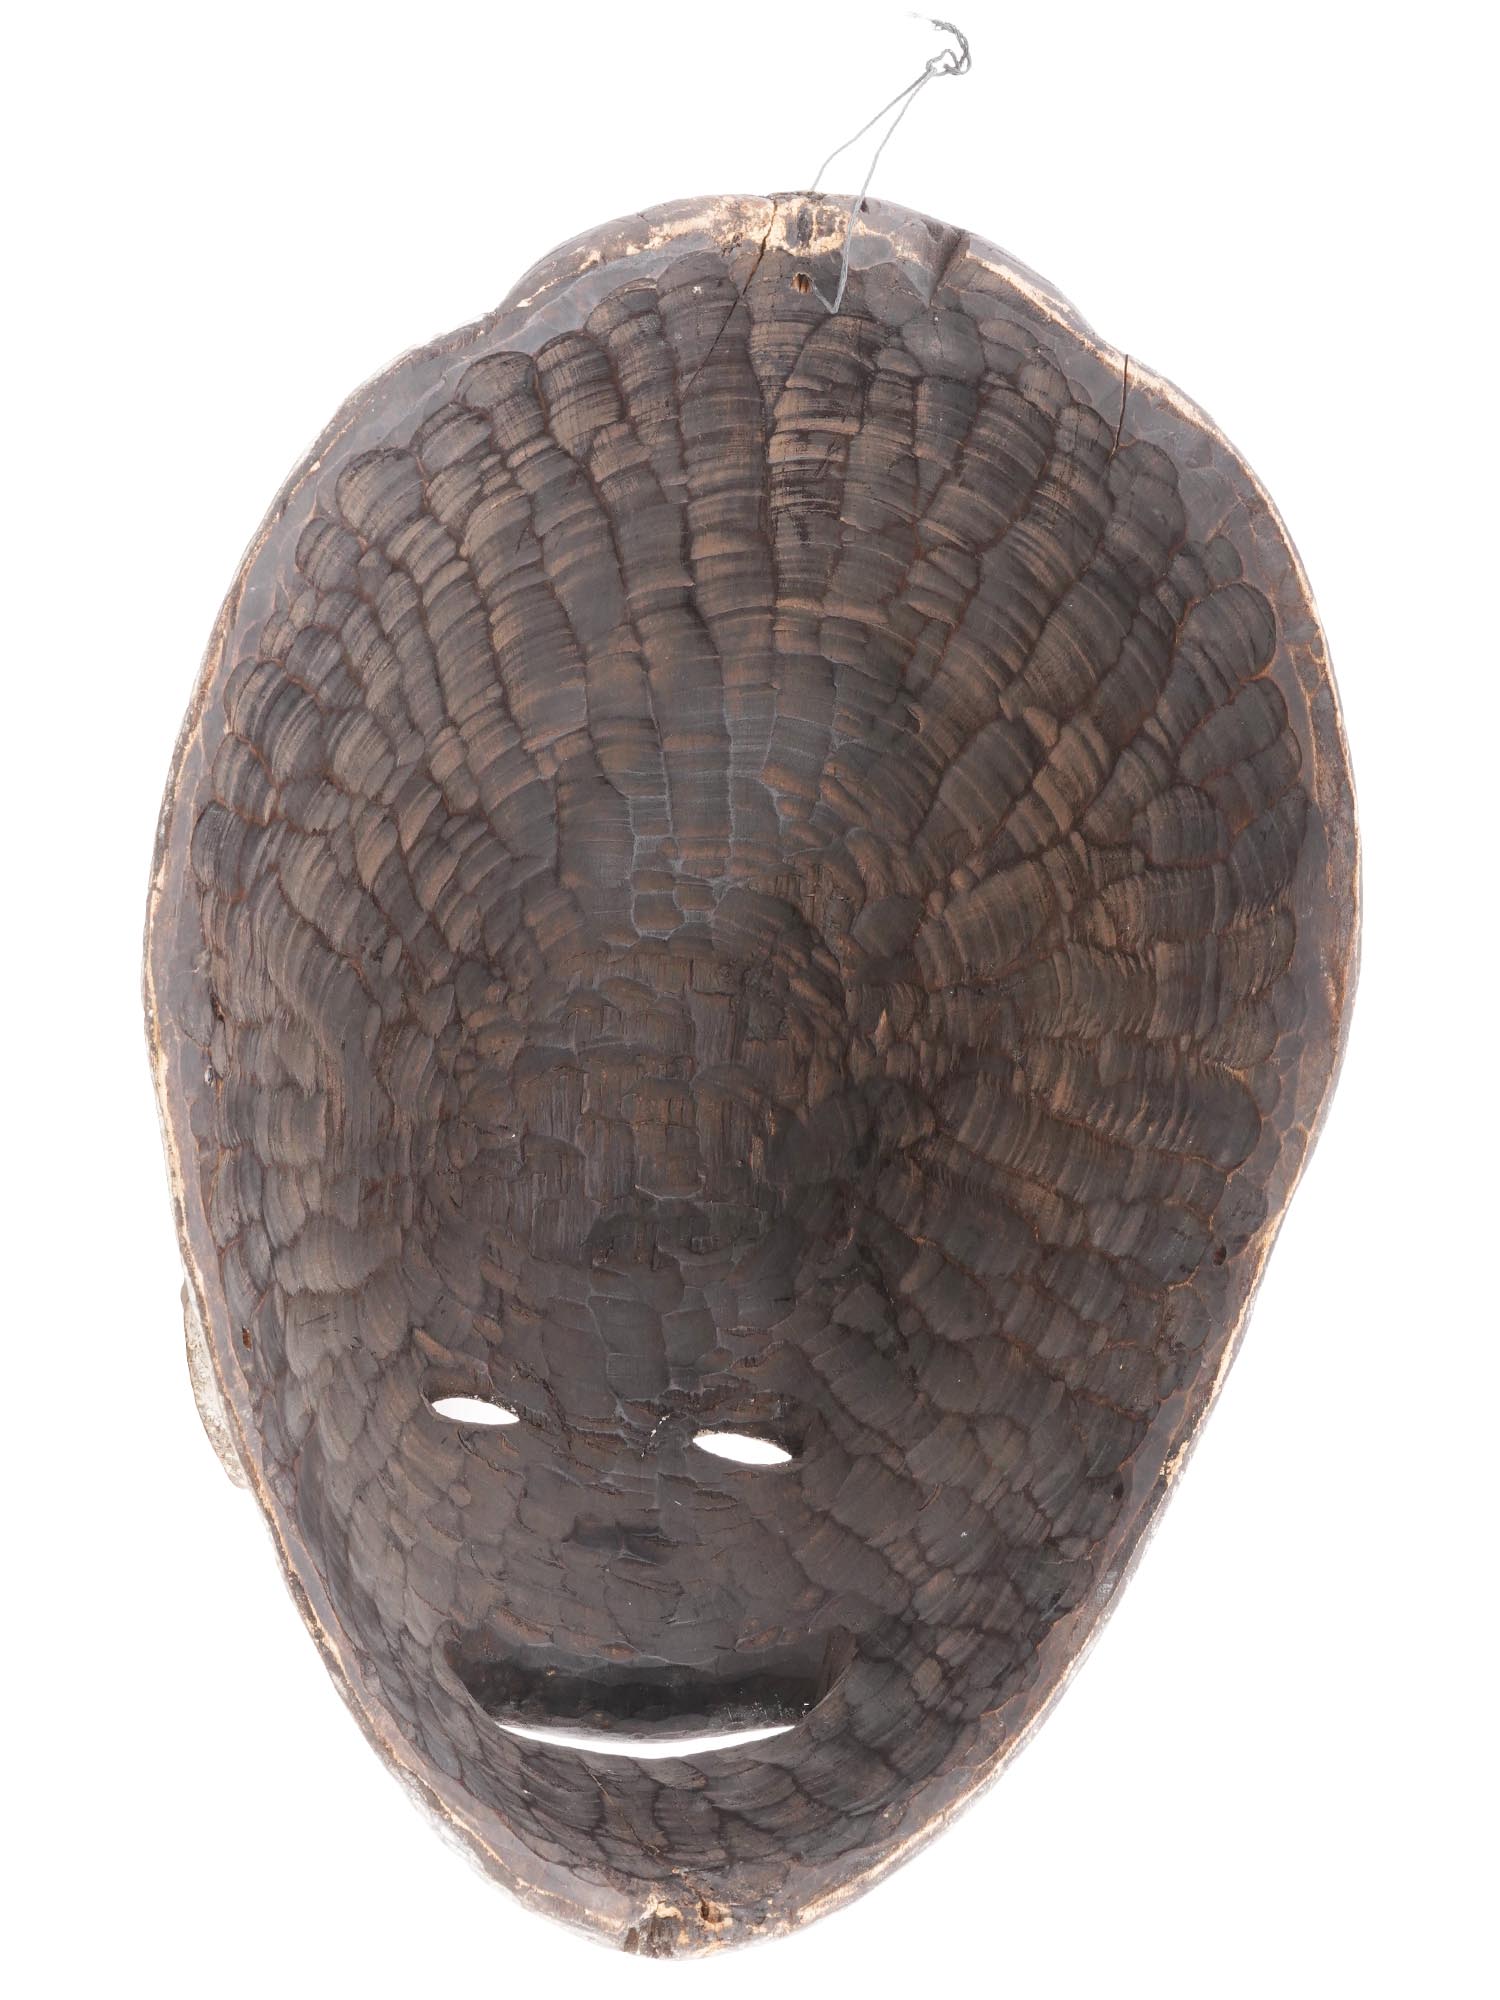 ANTIQUE AFRICAN GABON CARVED WOOD VUVI TRIBE MASK PIC-5